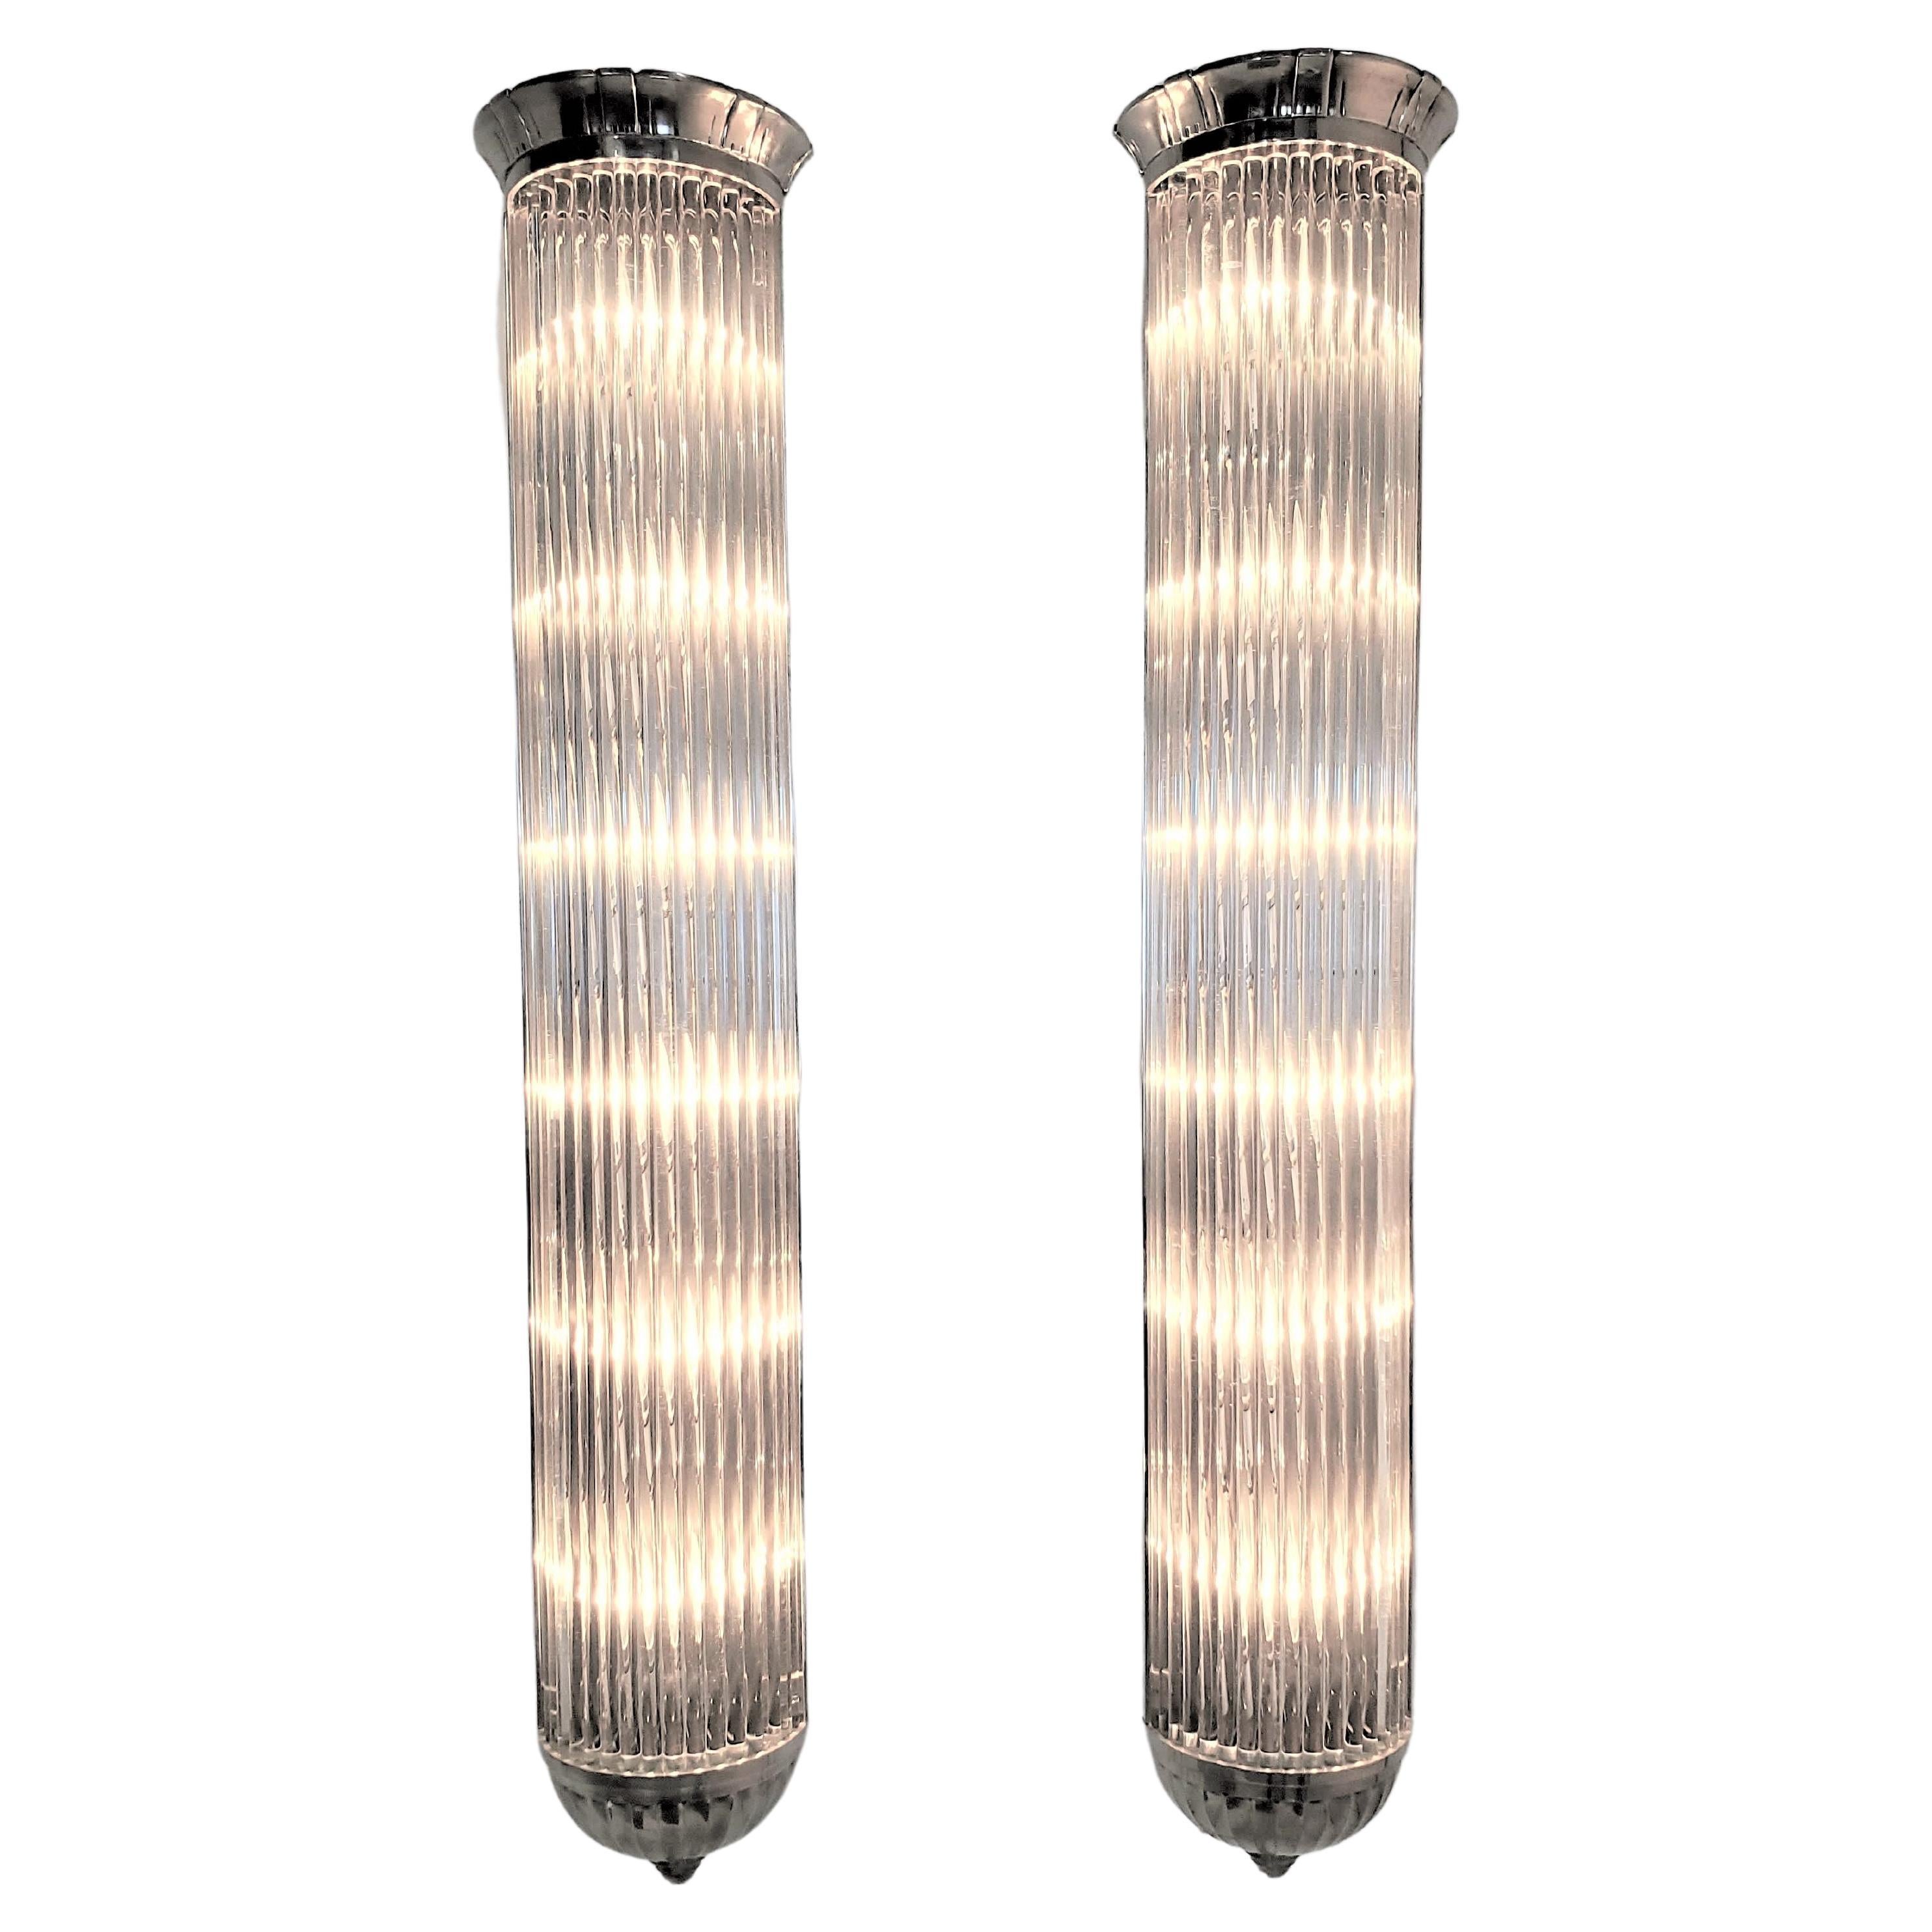 Monumental Pair of French Modernist Long Tubular Sconces by Petitot